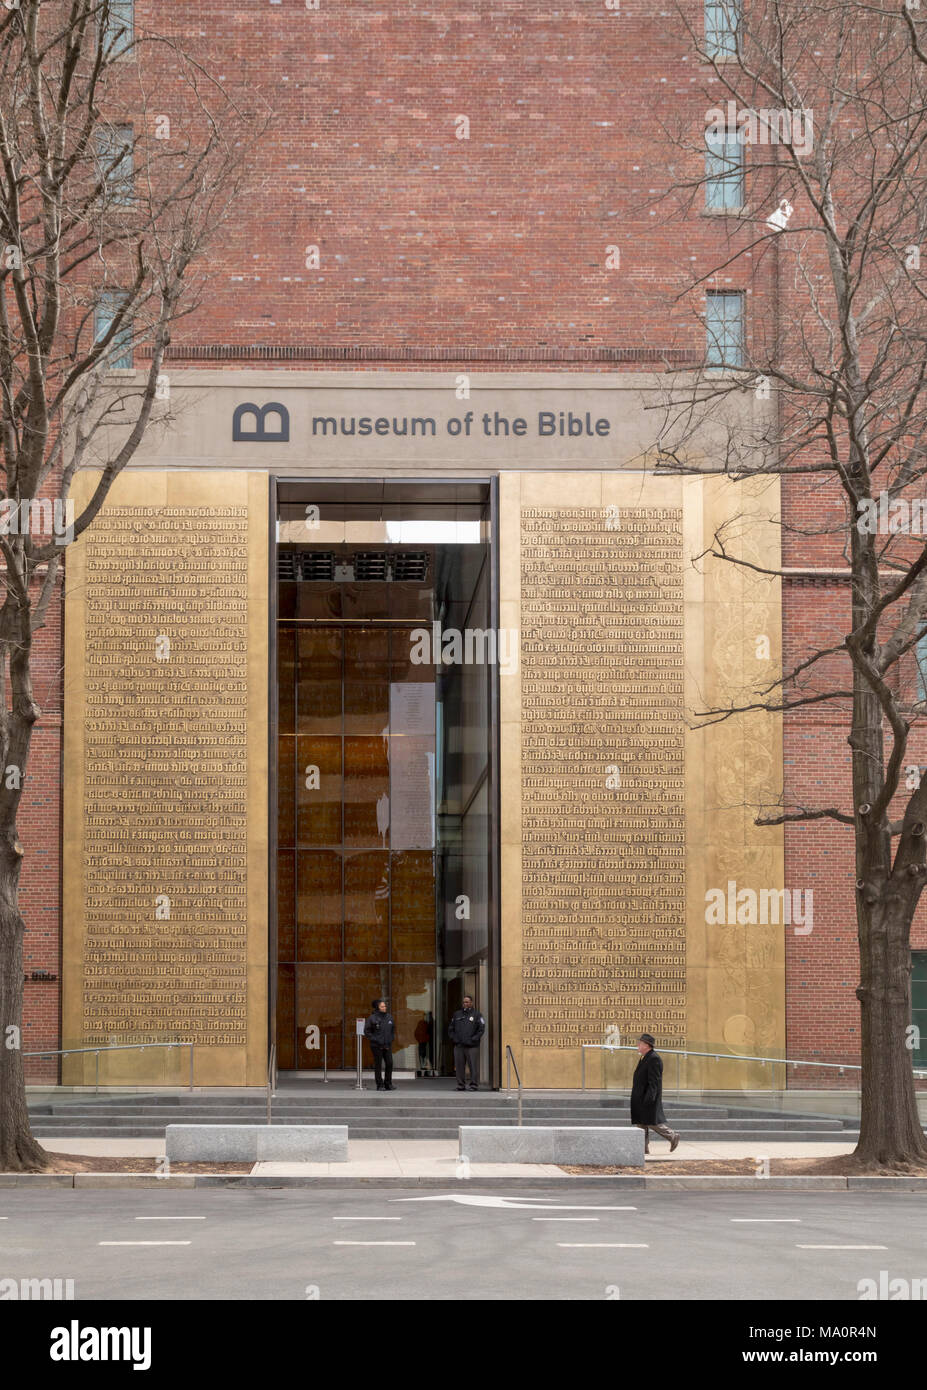 Washington, DC - The entrance to the Museum of the Bible. The 40-foot tall bronze doors carry the creation story from Genesis, from an early edition o Stock Photo